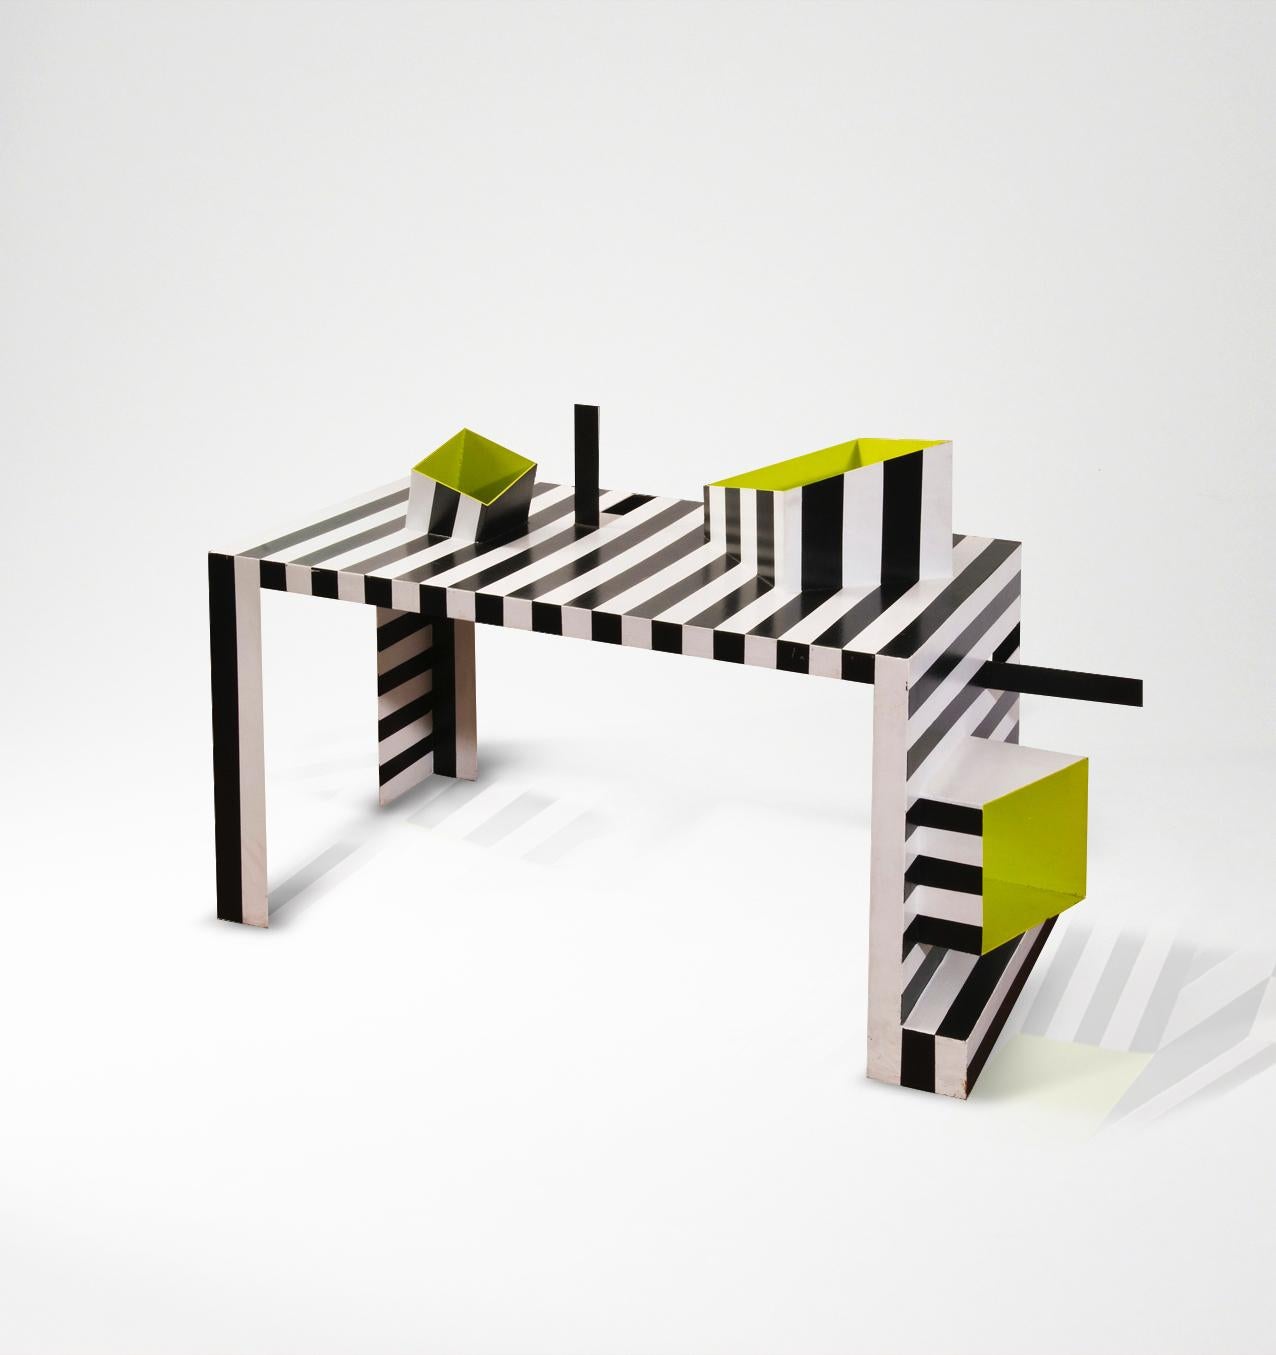 For Studio Alchimia, by Alessandro Guerriero
Painted and cut steel, in dramatic black and white stripes. Asymmetrical 'boxes' (the interiors brightened in lime green paint) protrude from desk top and side for organising paperwork, desk accessories,